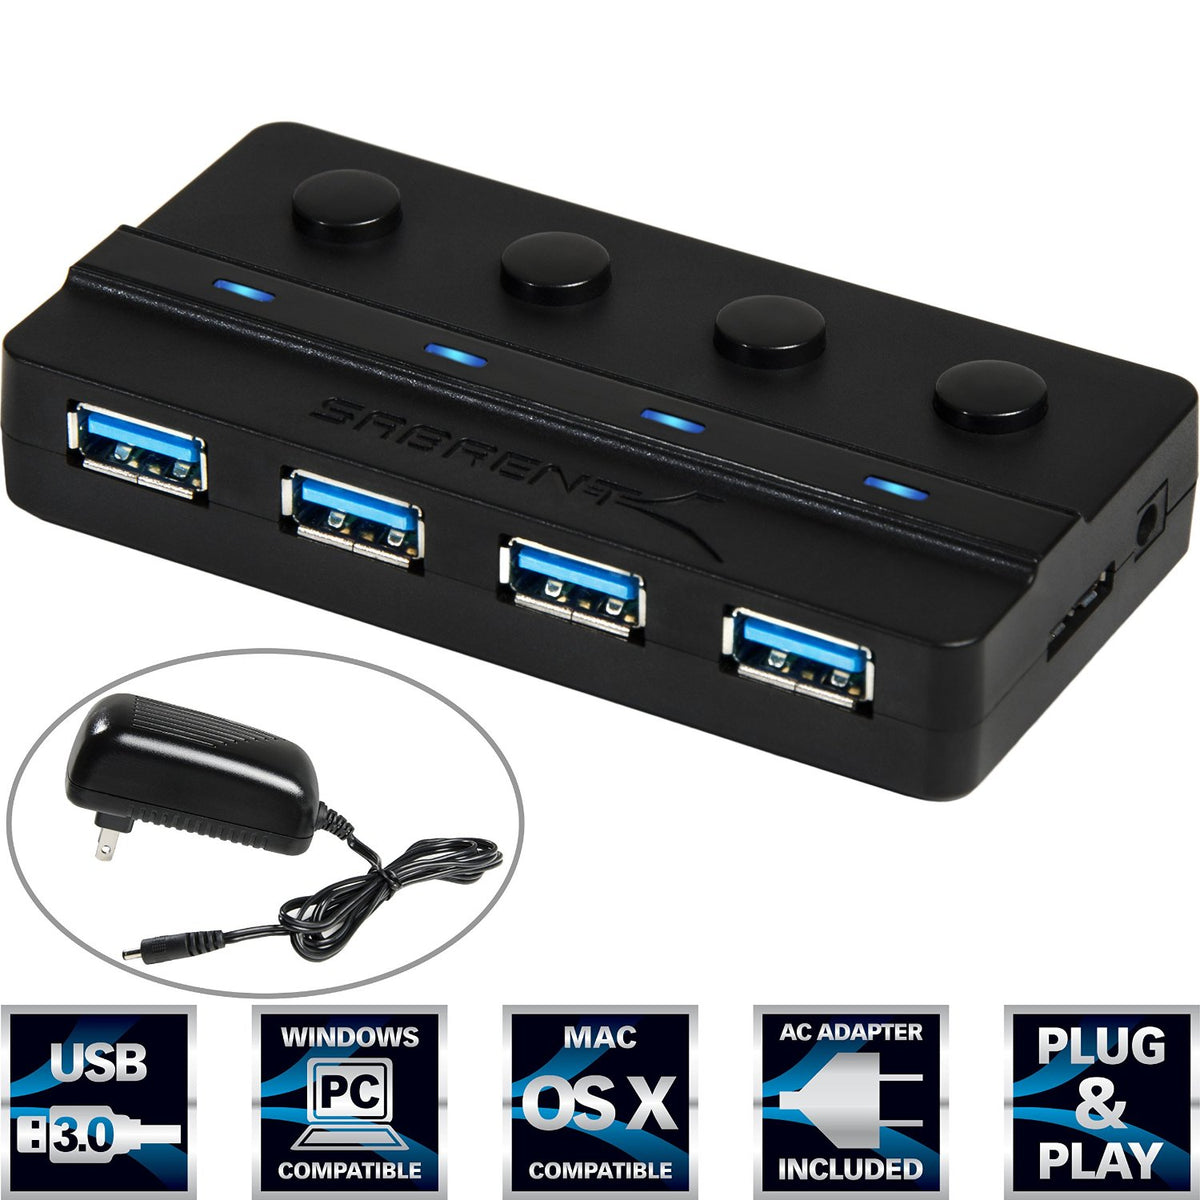 USB 3.0 4-Port High Powered Hub with 4A Power Adapter